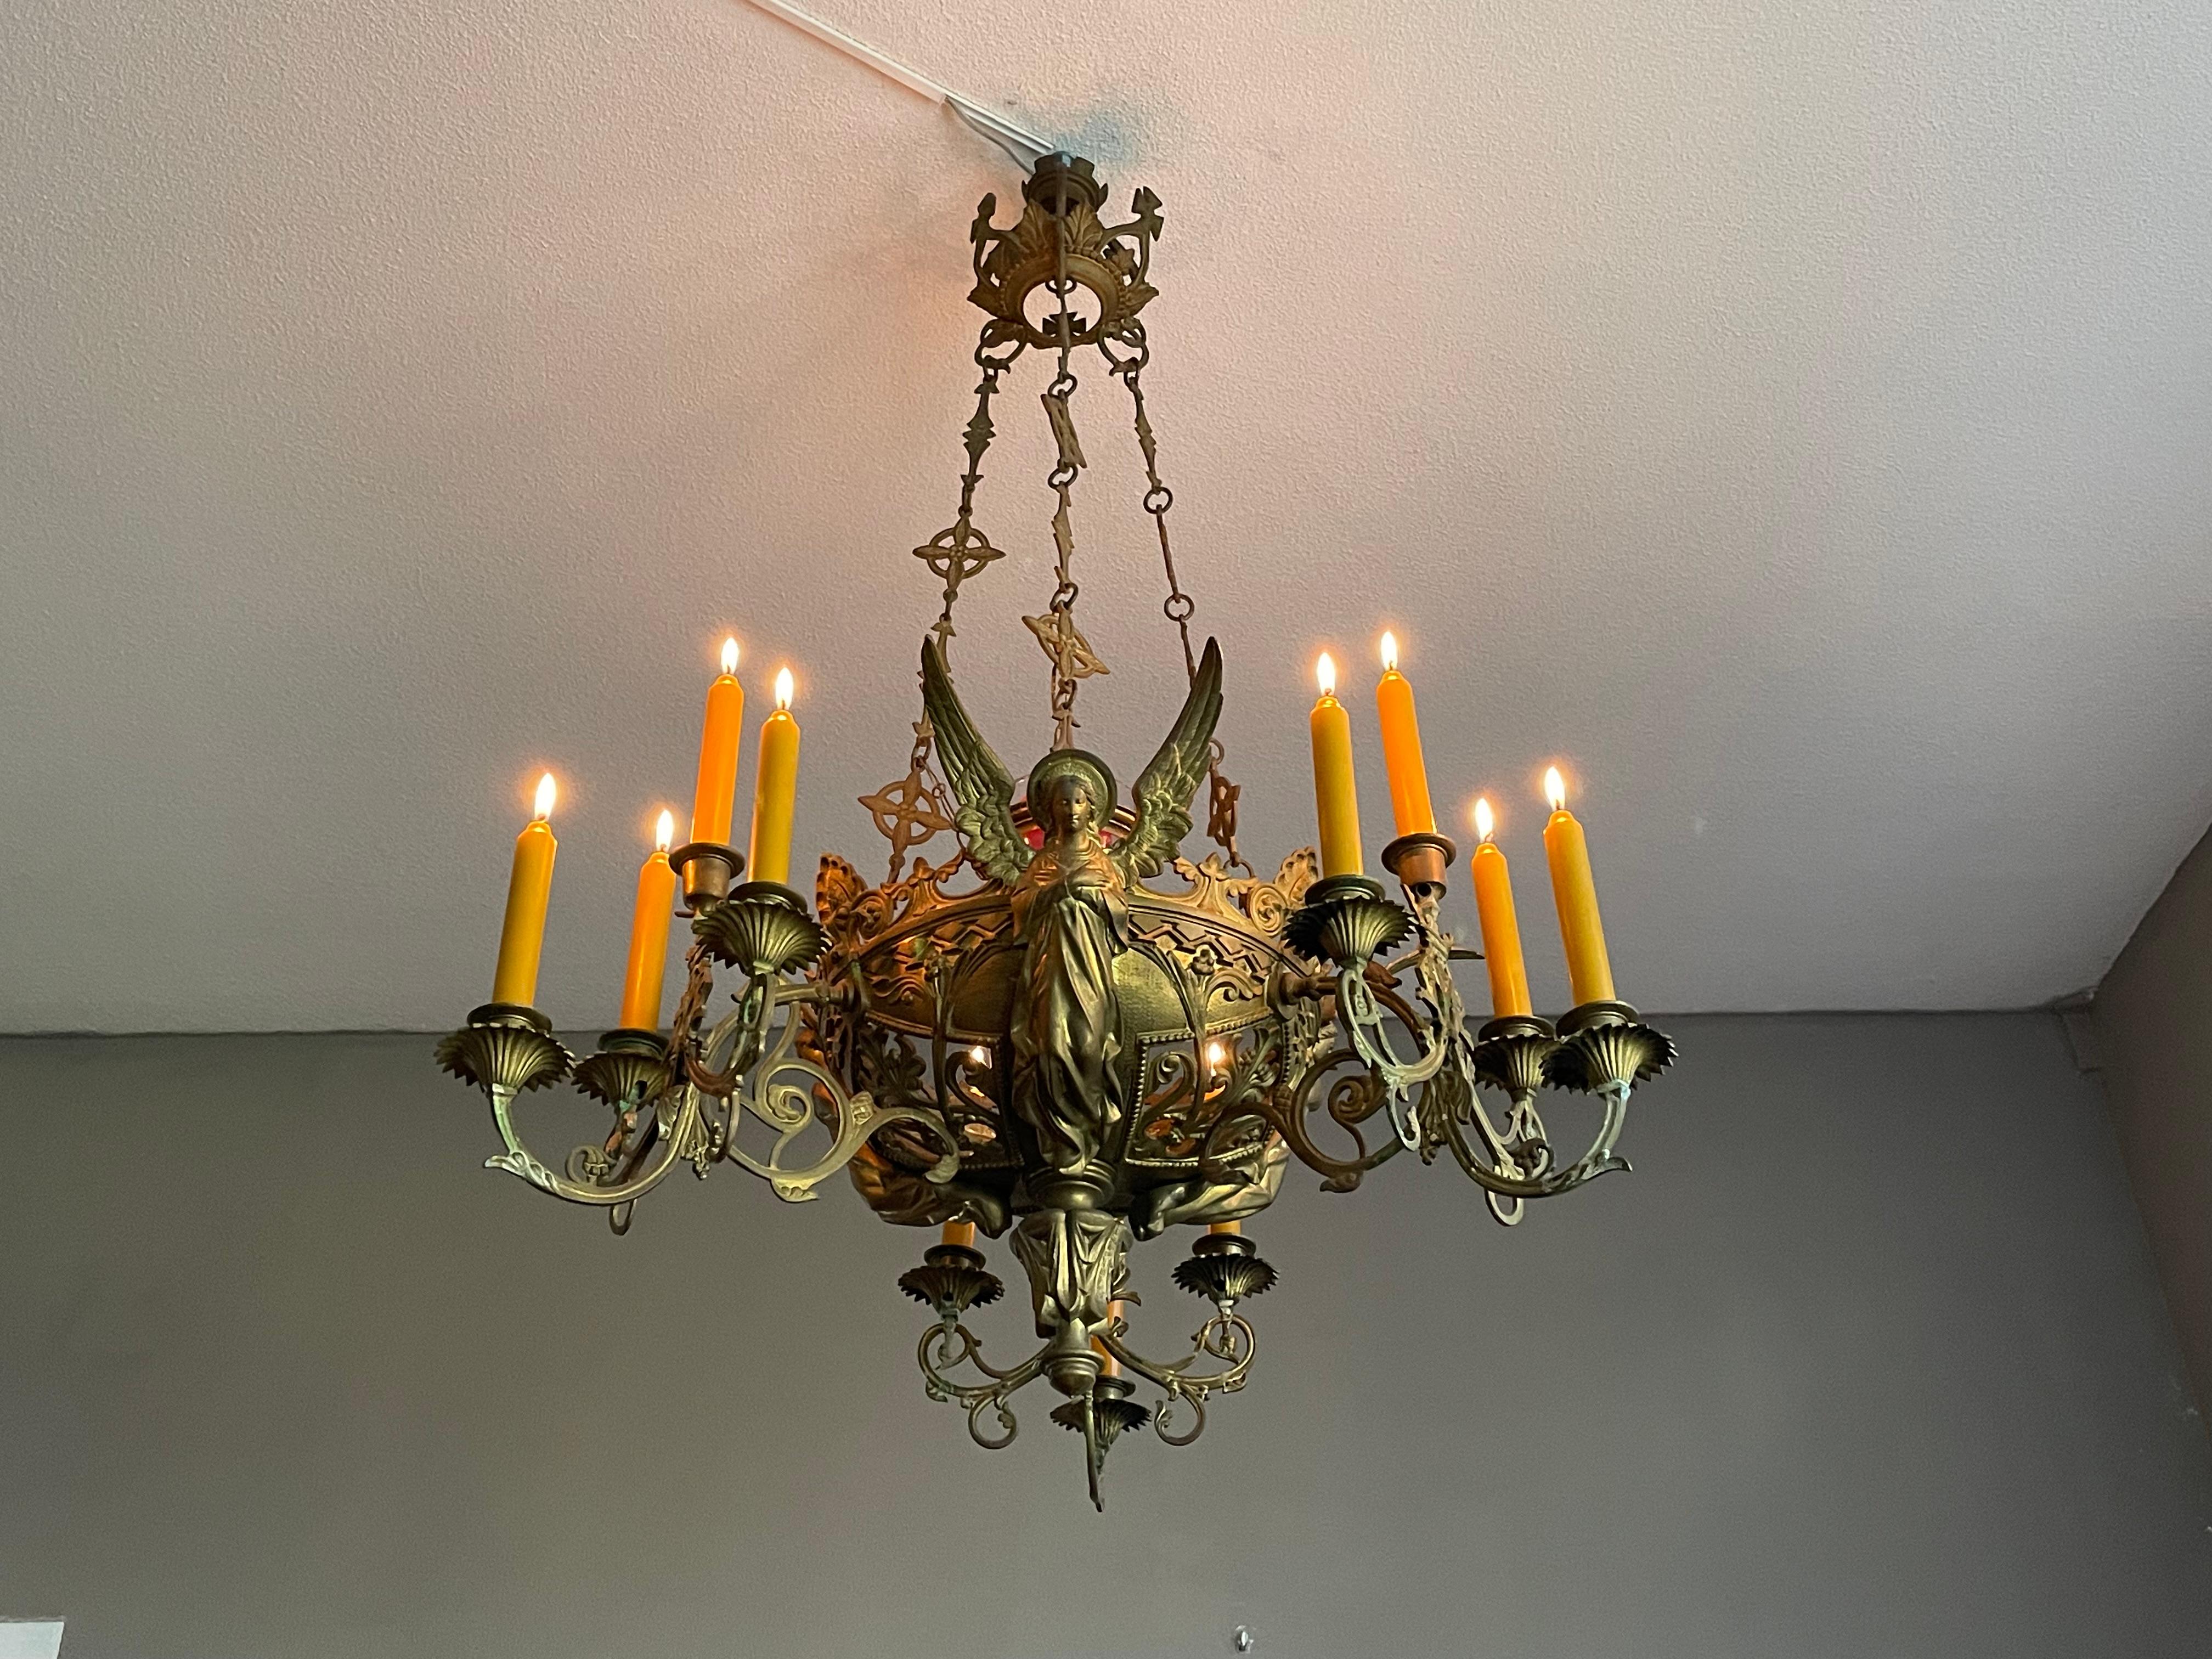 European Bronze Gothic Revival Candle Chandelier w. Virgin Mary & Marian Cross Sculptures For Sale